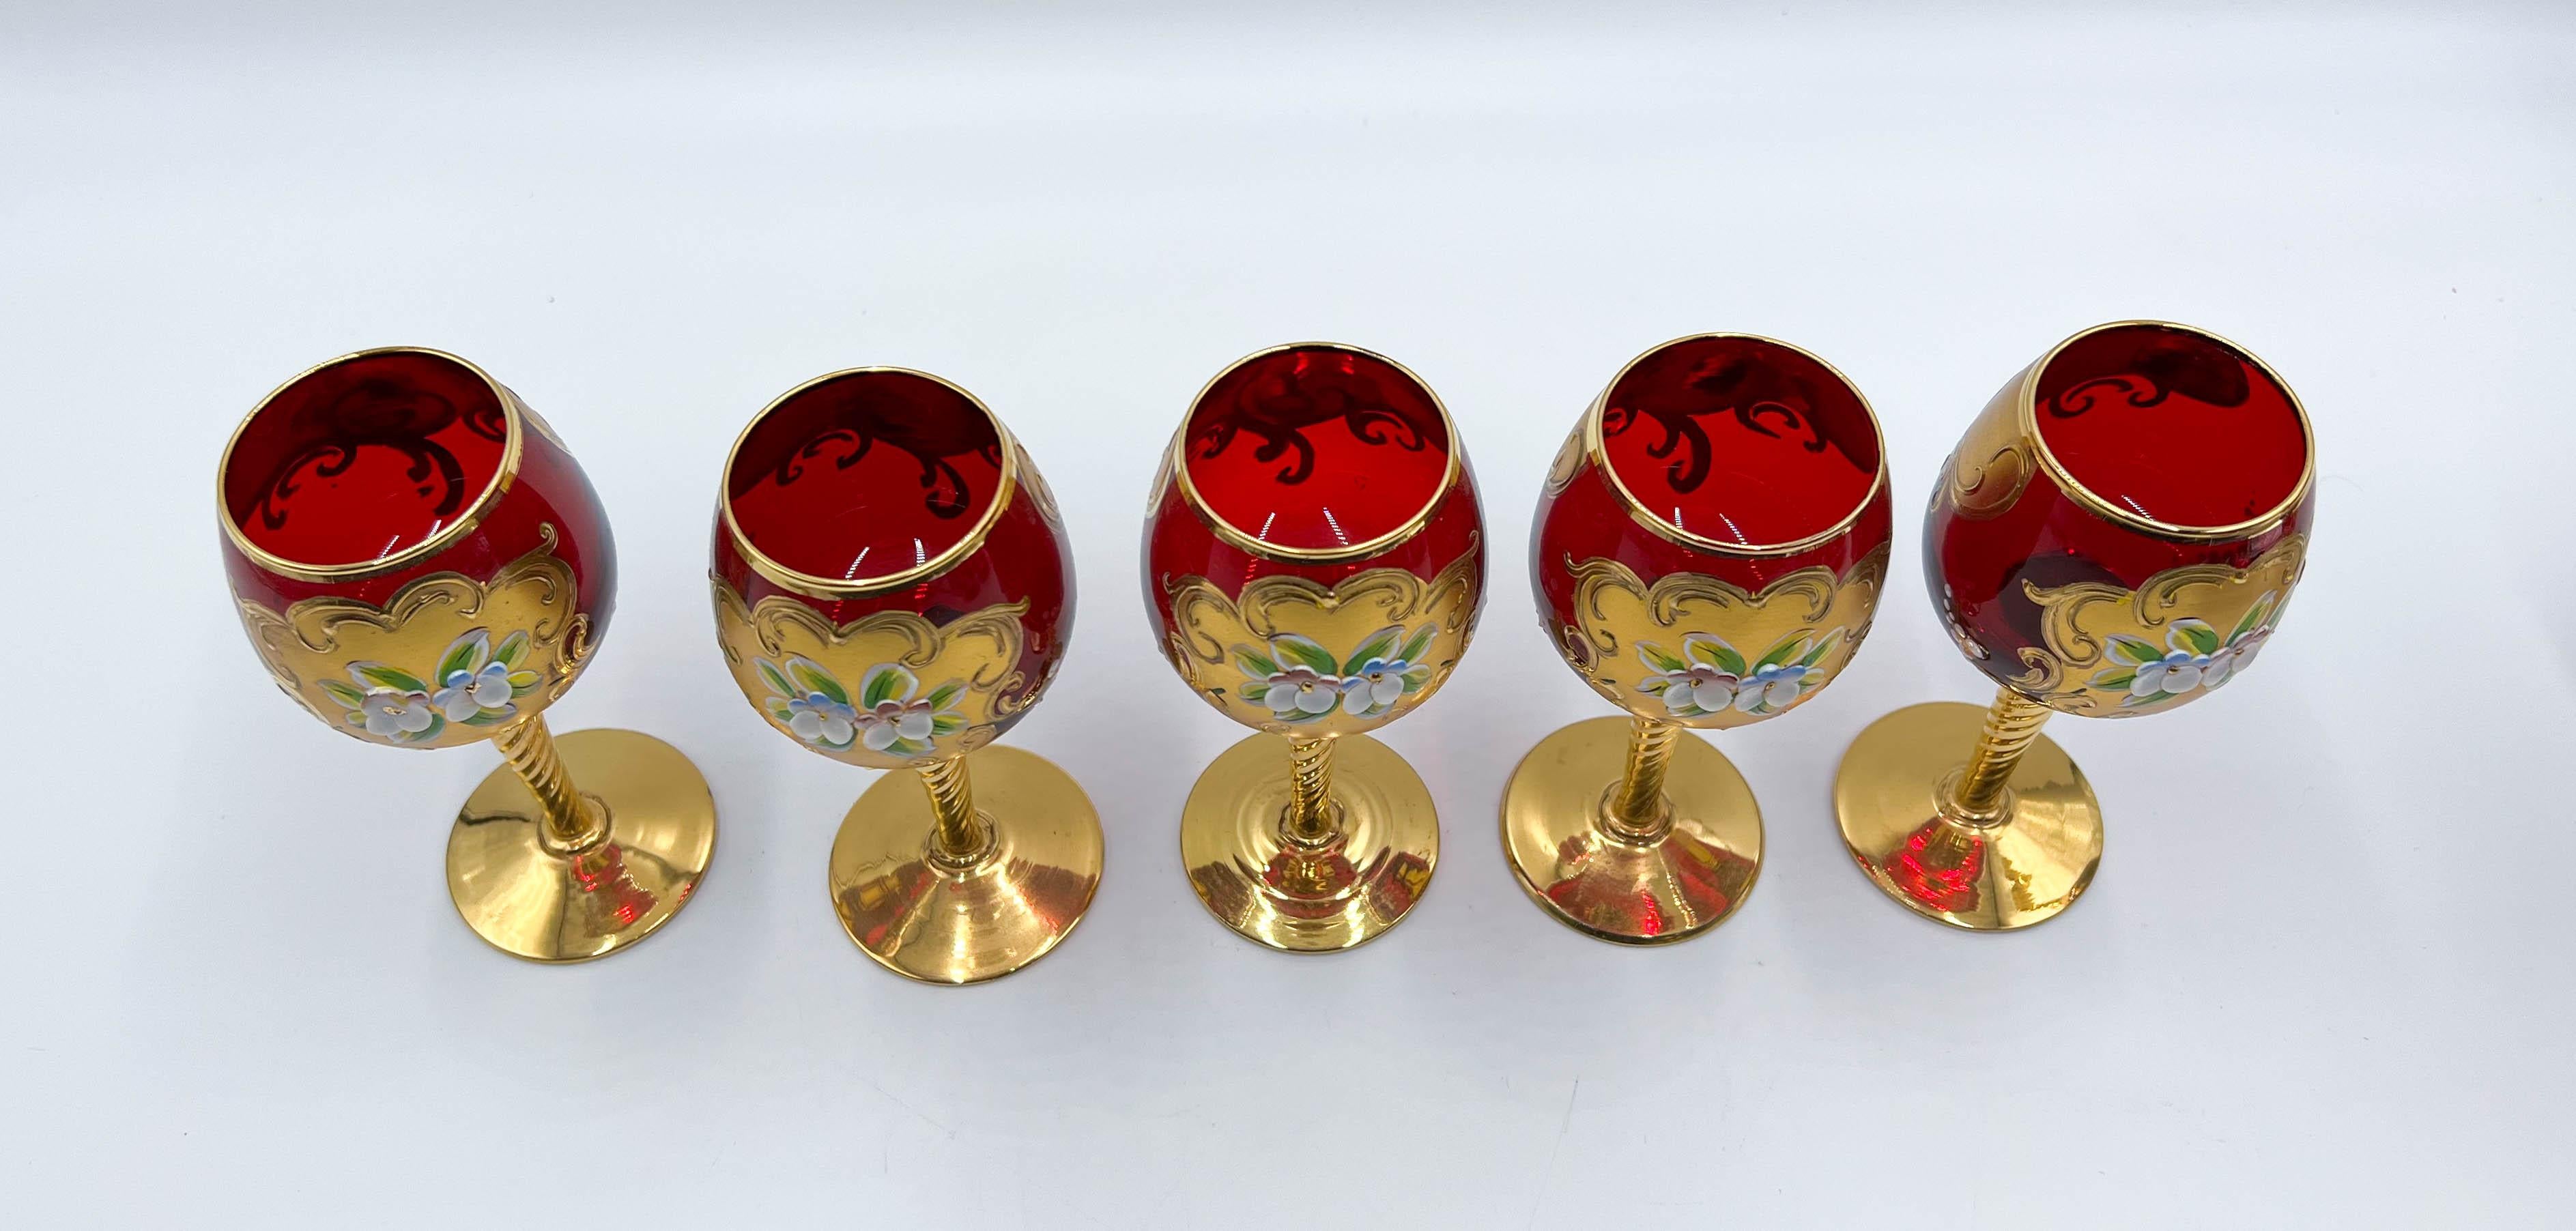 Hand-Crafted Vintage Tre Fuochi Venetian Murano Glass Ruby Red Goblets and Pitcher, 8 Pc Set For Sale